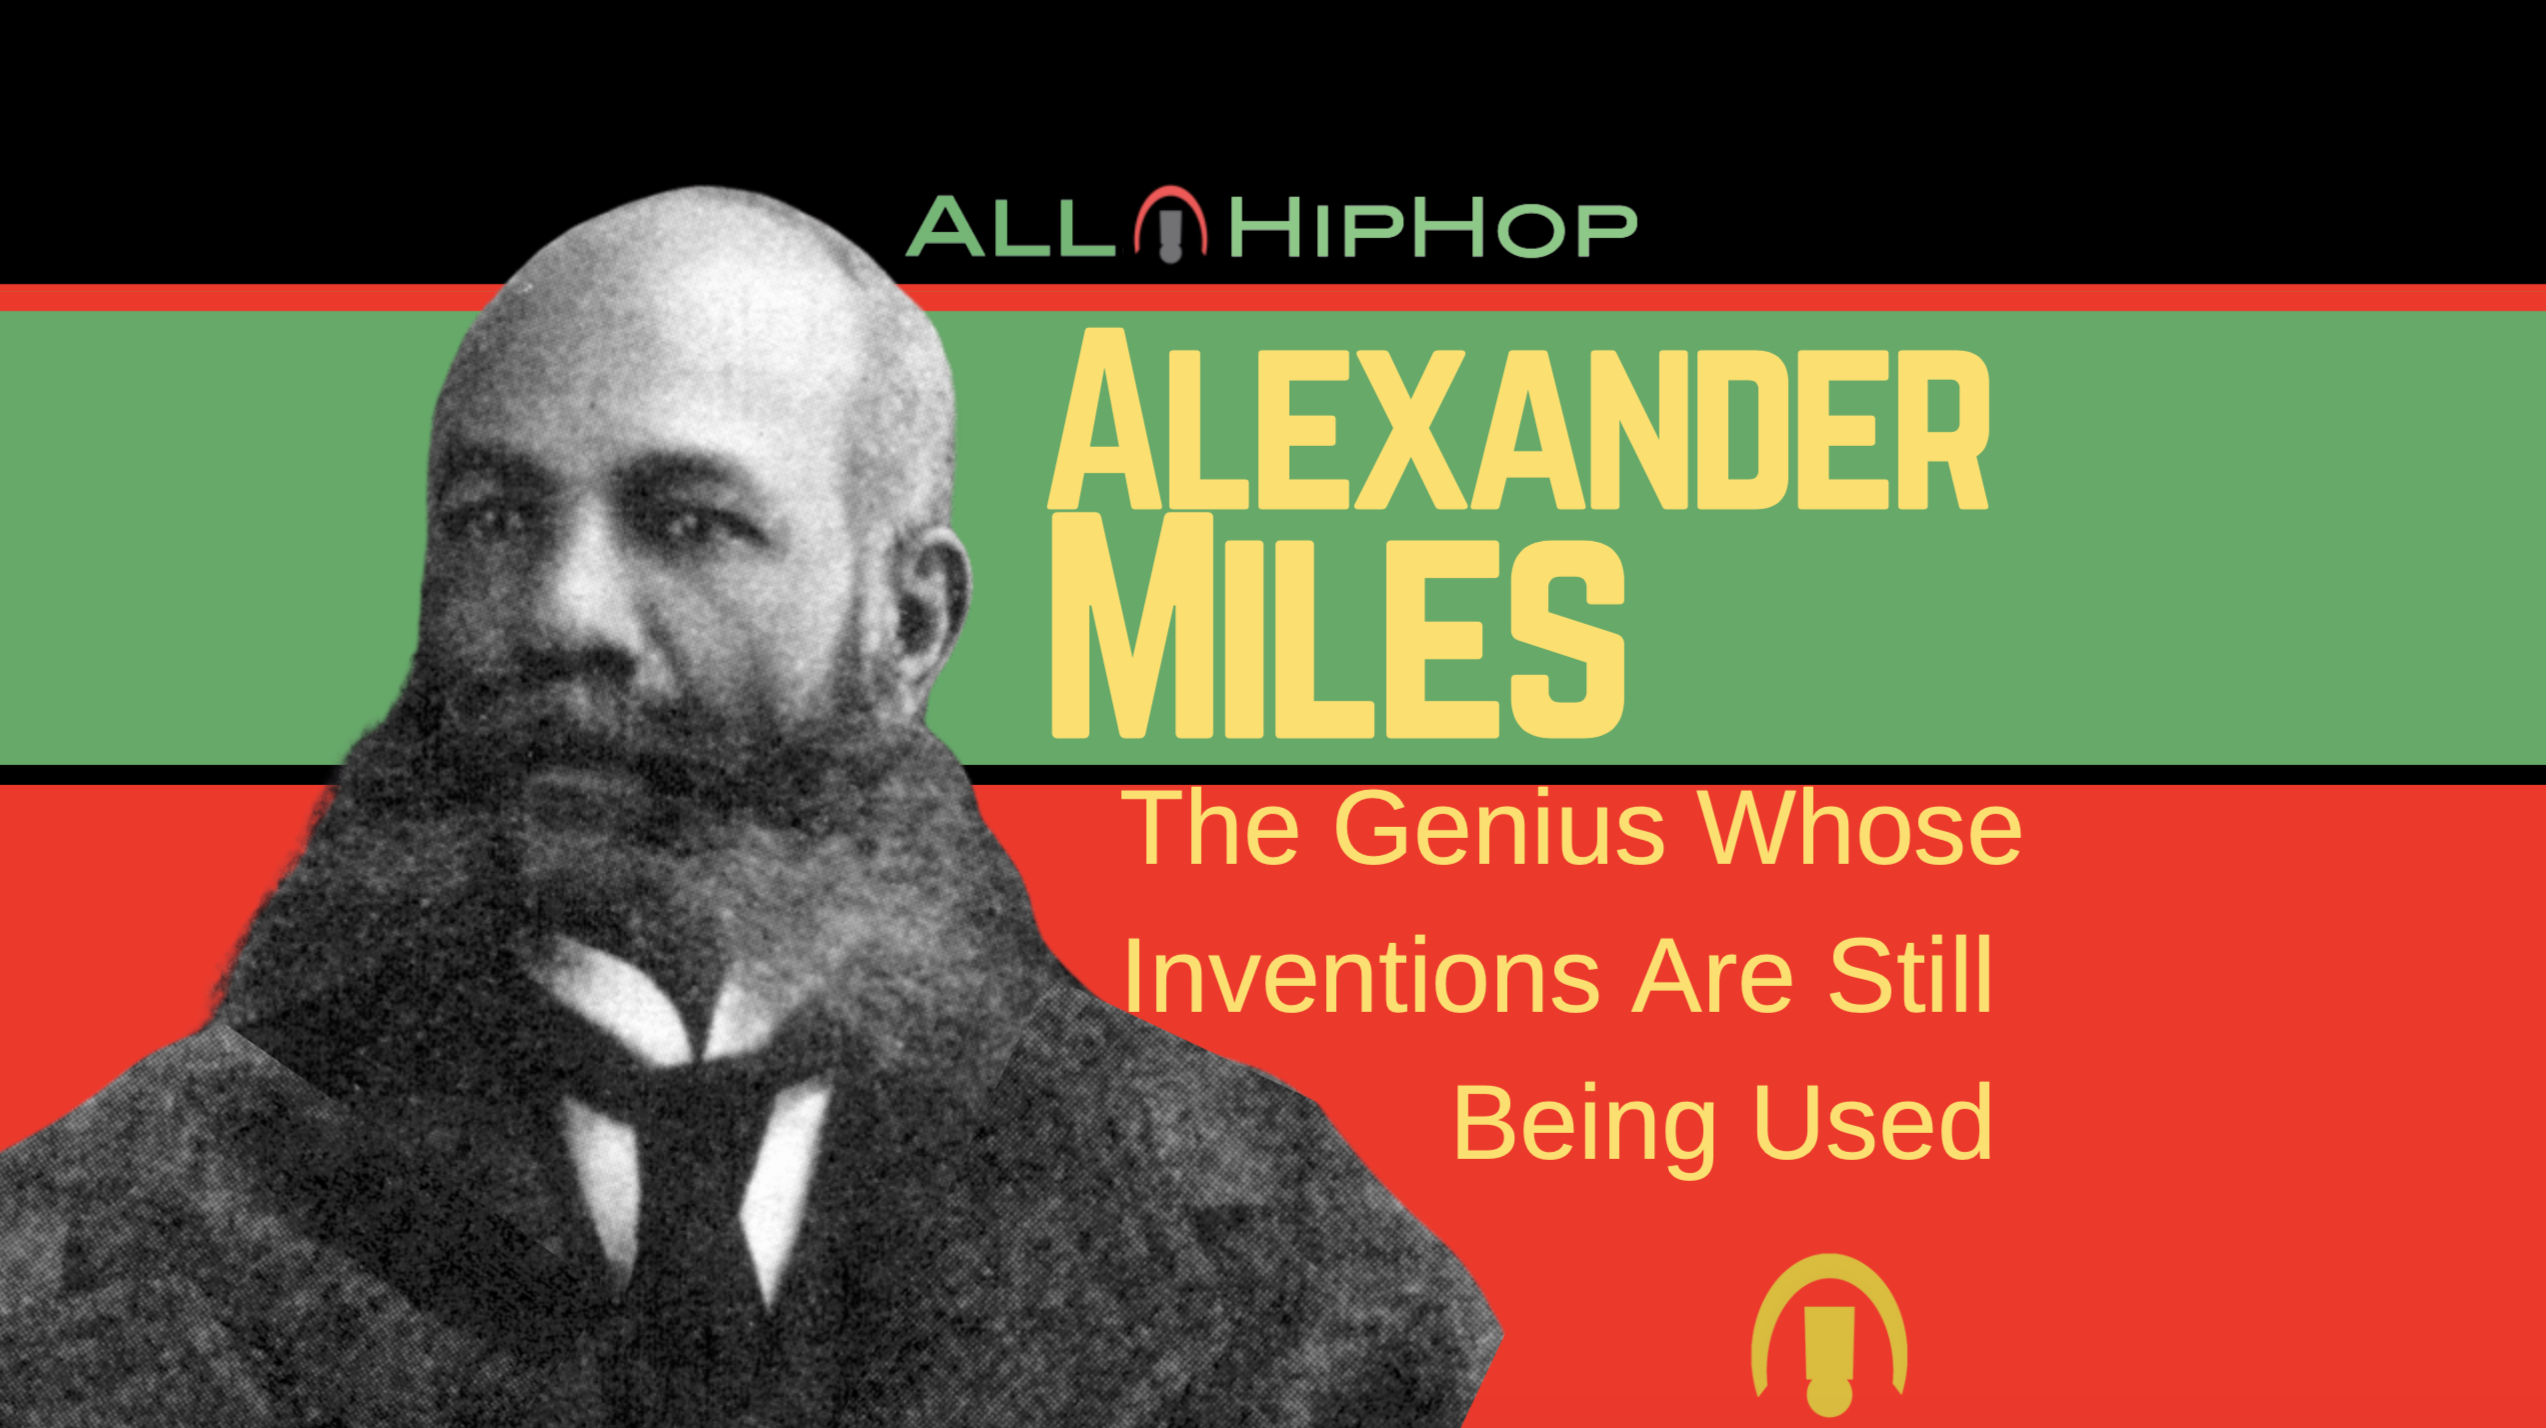 Alexander Miles The Genius Whose Invention Is Still Used - AllHipHop